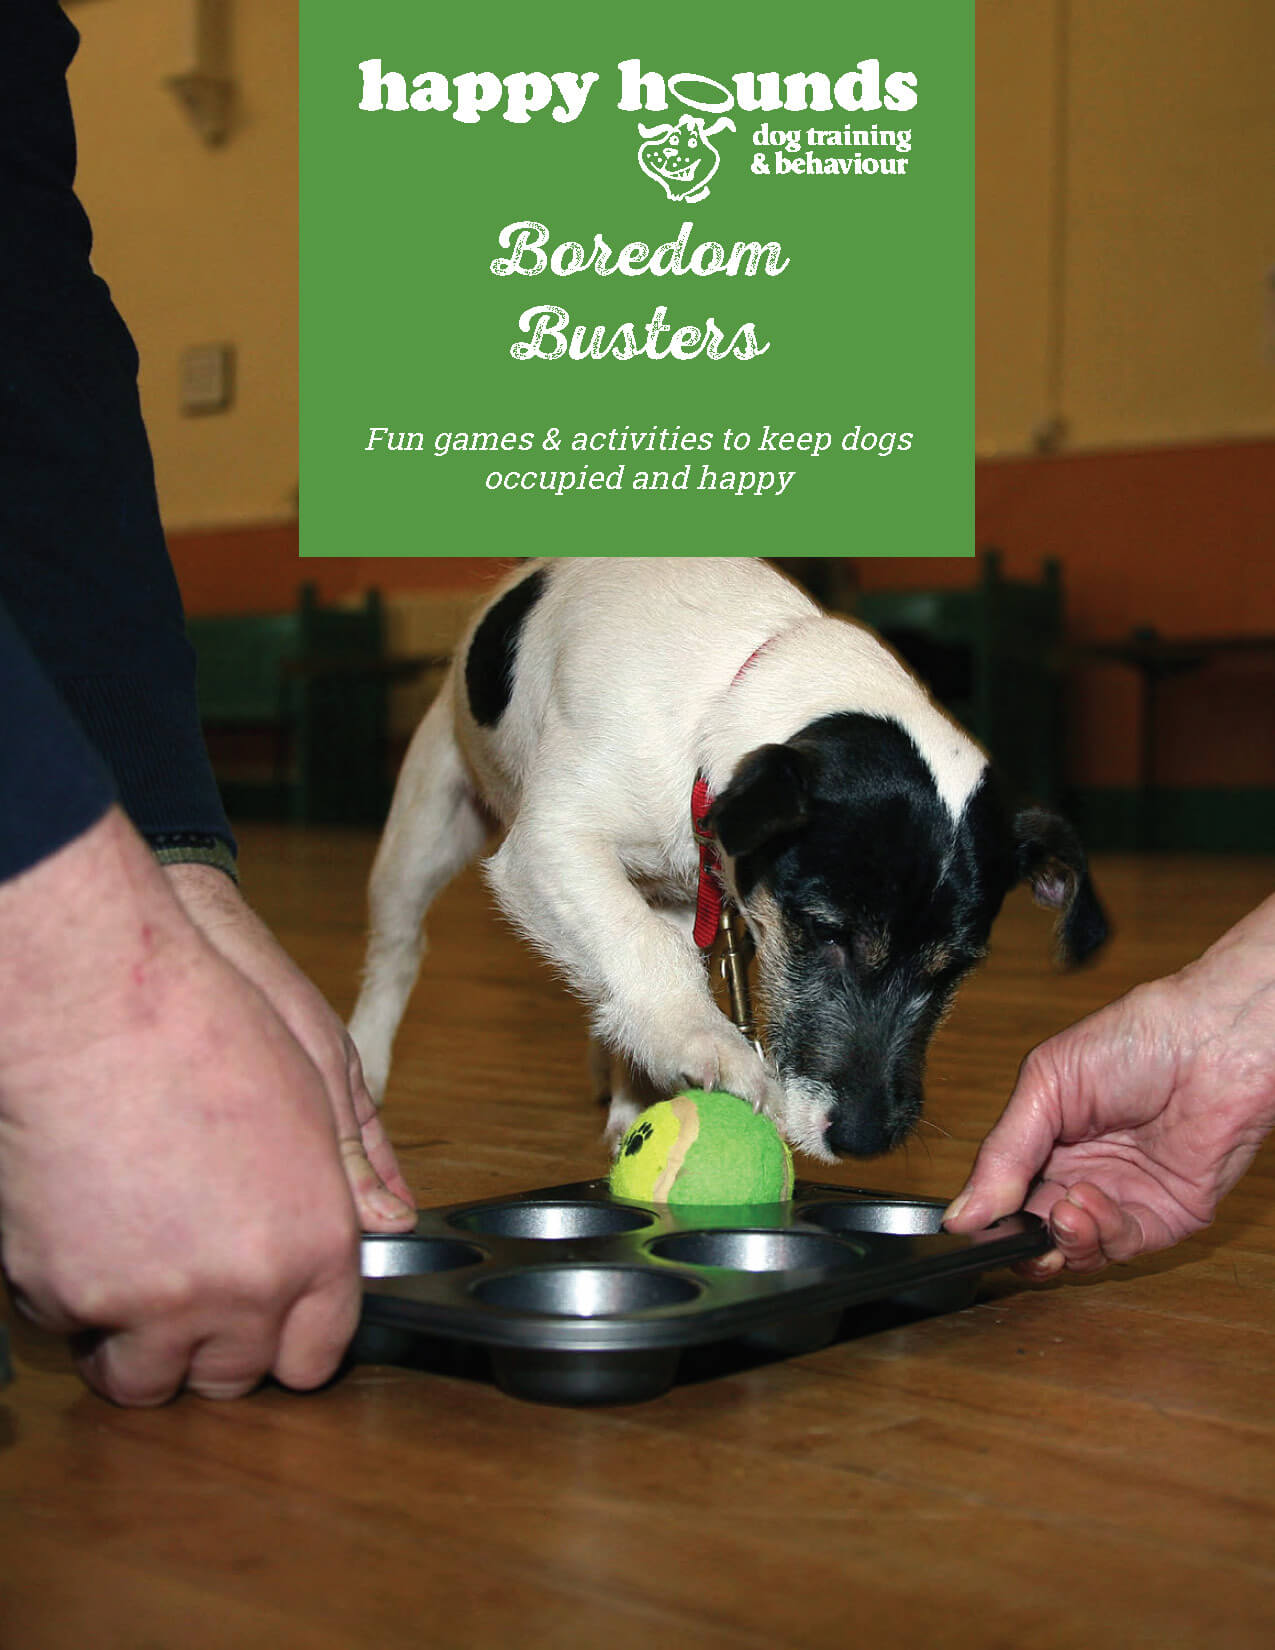 Boredom Busters  Fun & Inexpensive Games to Keep Dogs Occupied